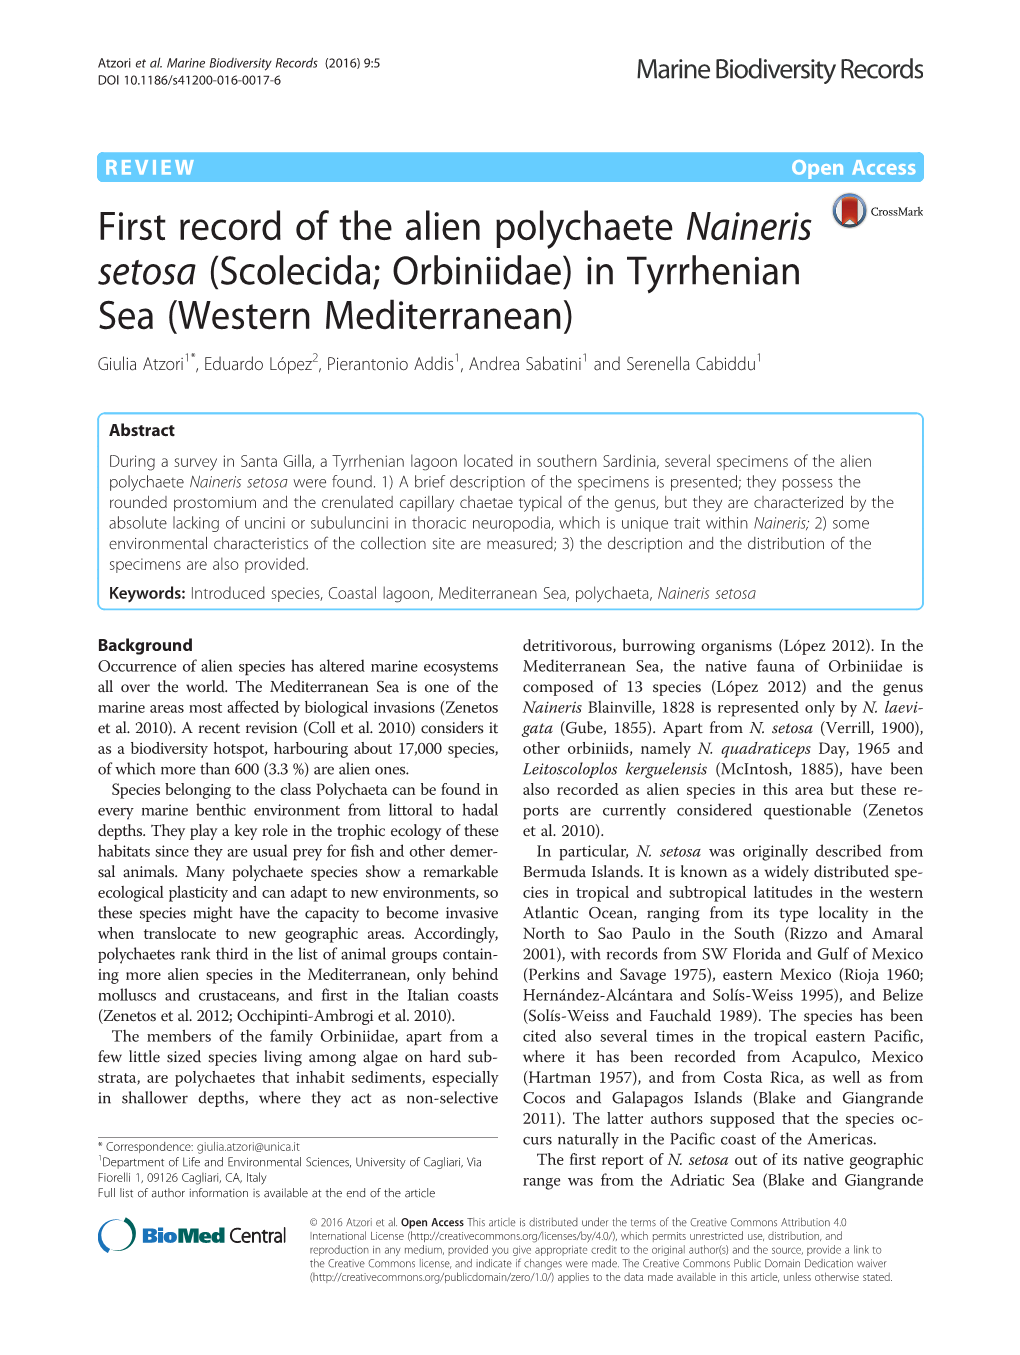 First Record of the Alien Polychaete Naineris Setosa